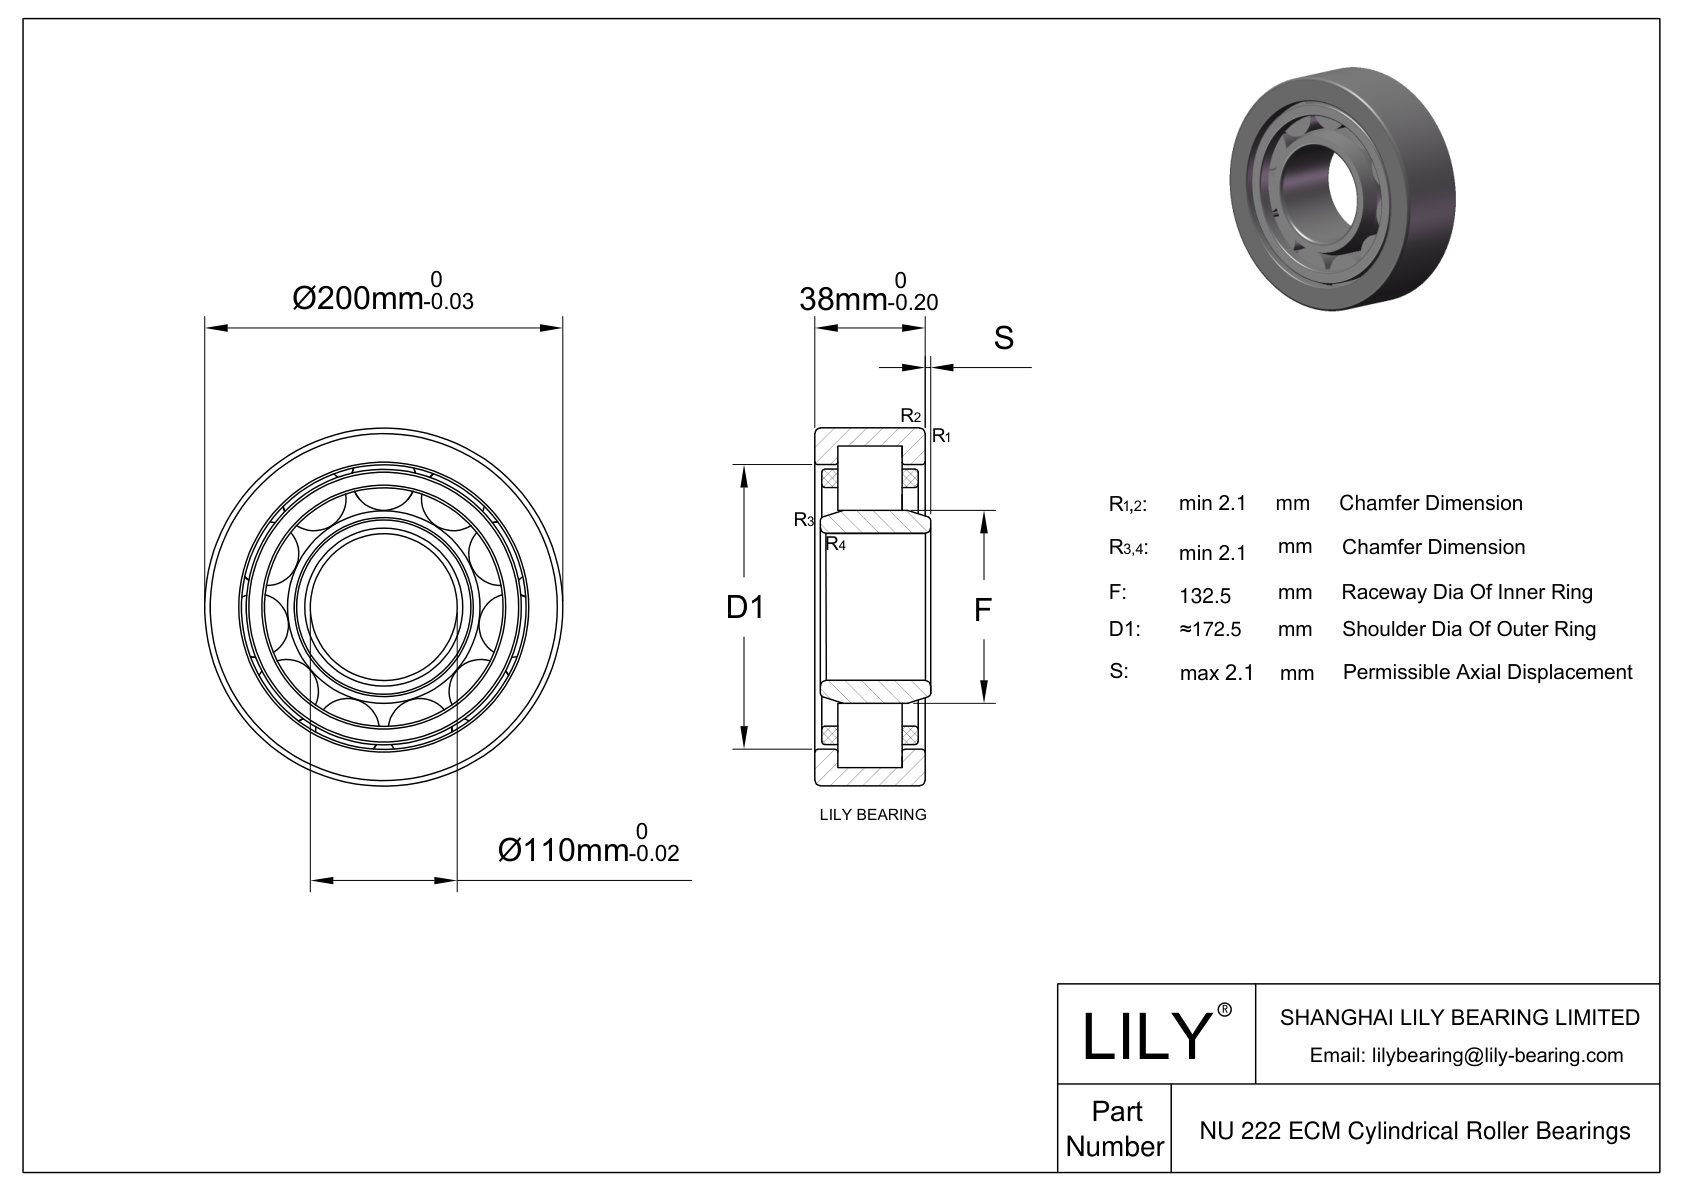 NU 222 ECM/C3VL0241 Ceramic Coated Cylindrical Roller Bearings cad drawing